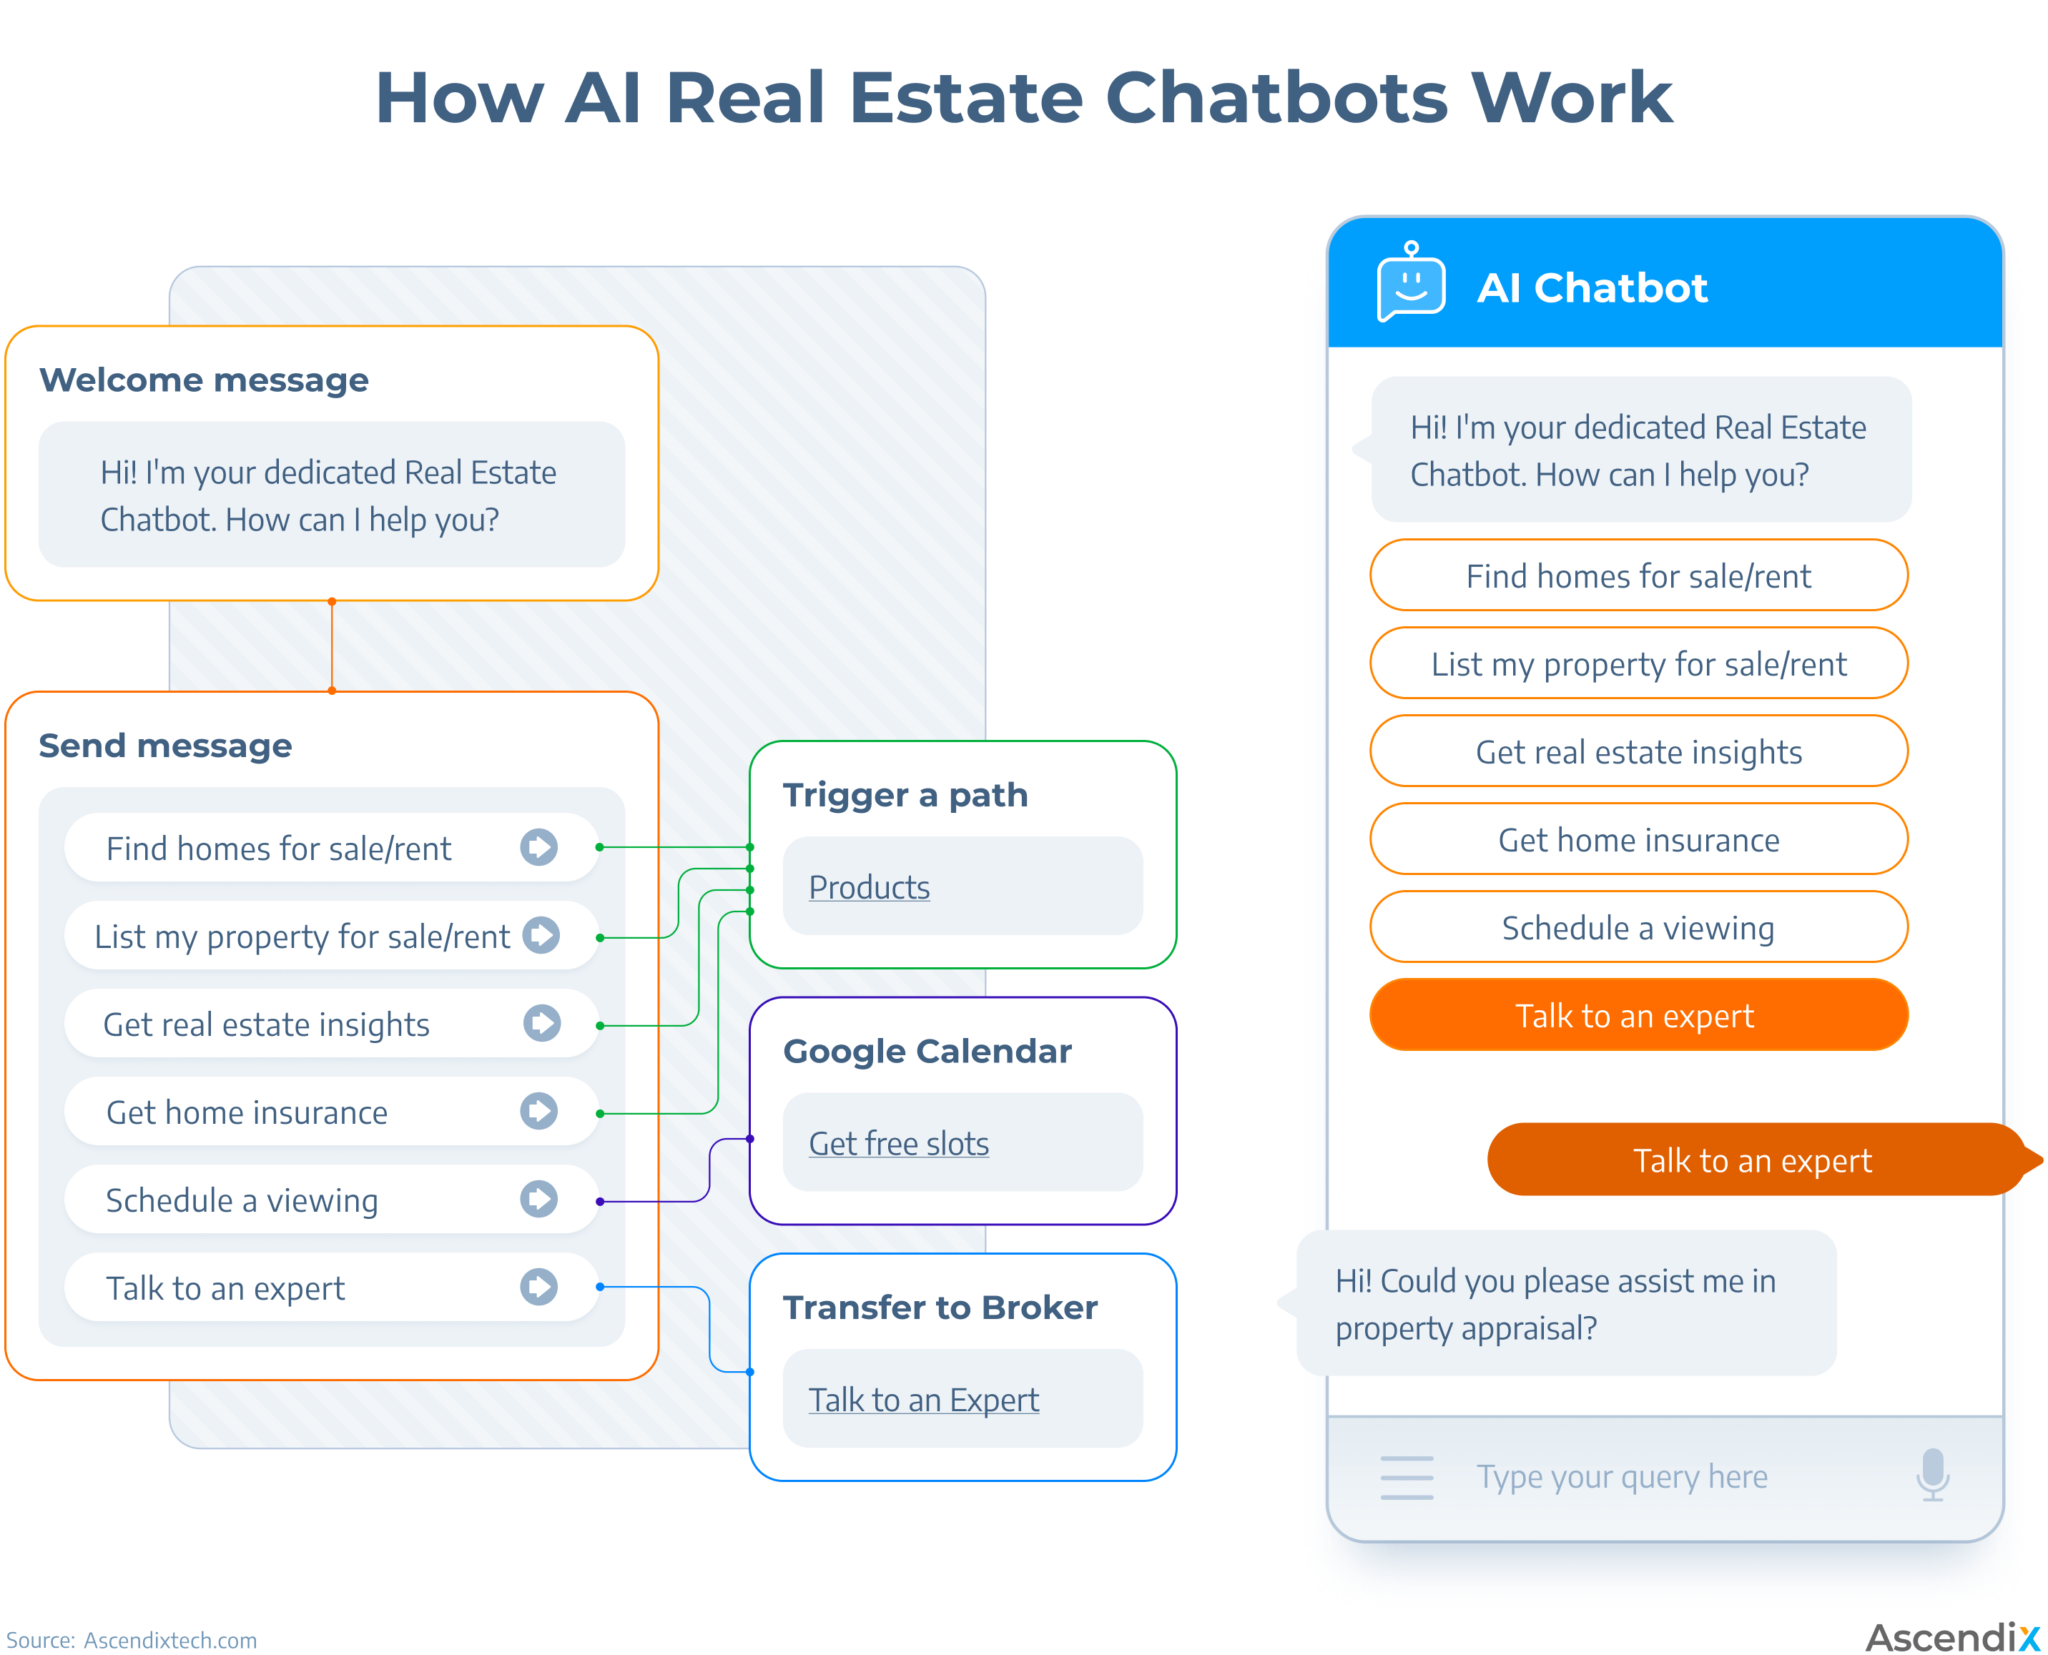 Scheme showing how AI chatbot technology works